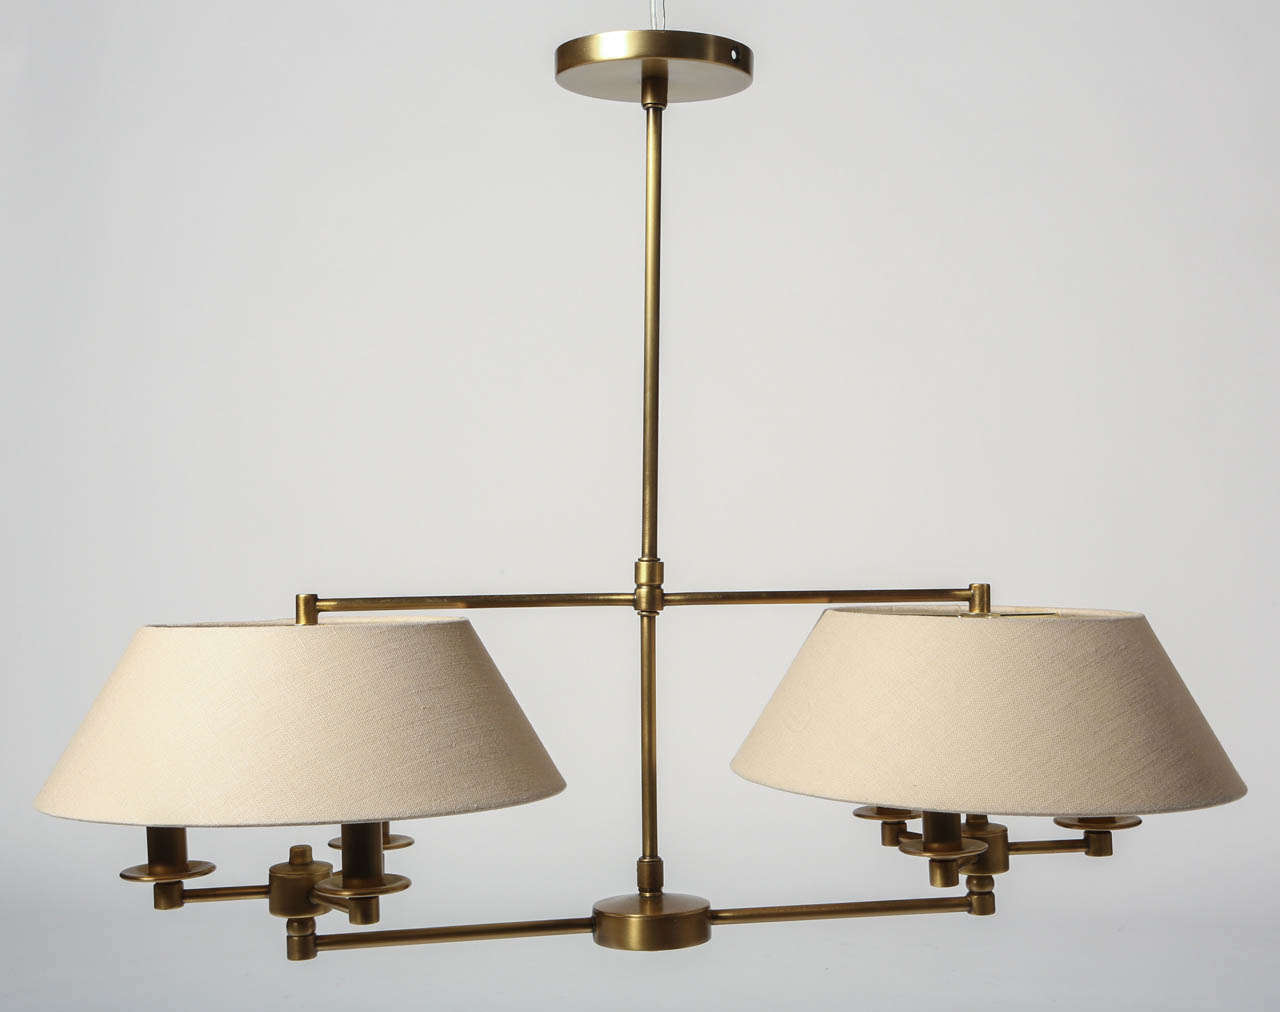 This handmade double arm pendant is a classically styled ceiling light fixture. Finished in antique burnished brass. Each shade conceals 3 bulbs making it a great task light. This light would be perfect over a kitchen island or a dining room table.